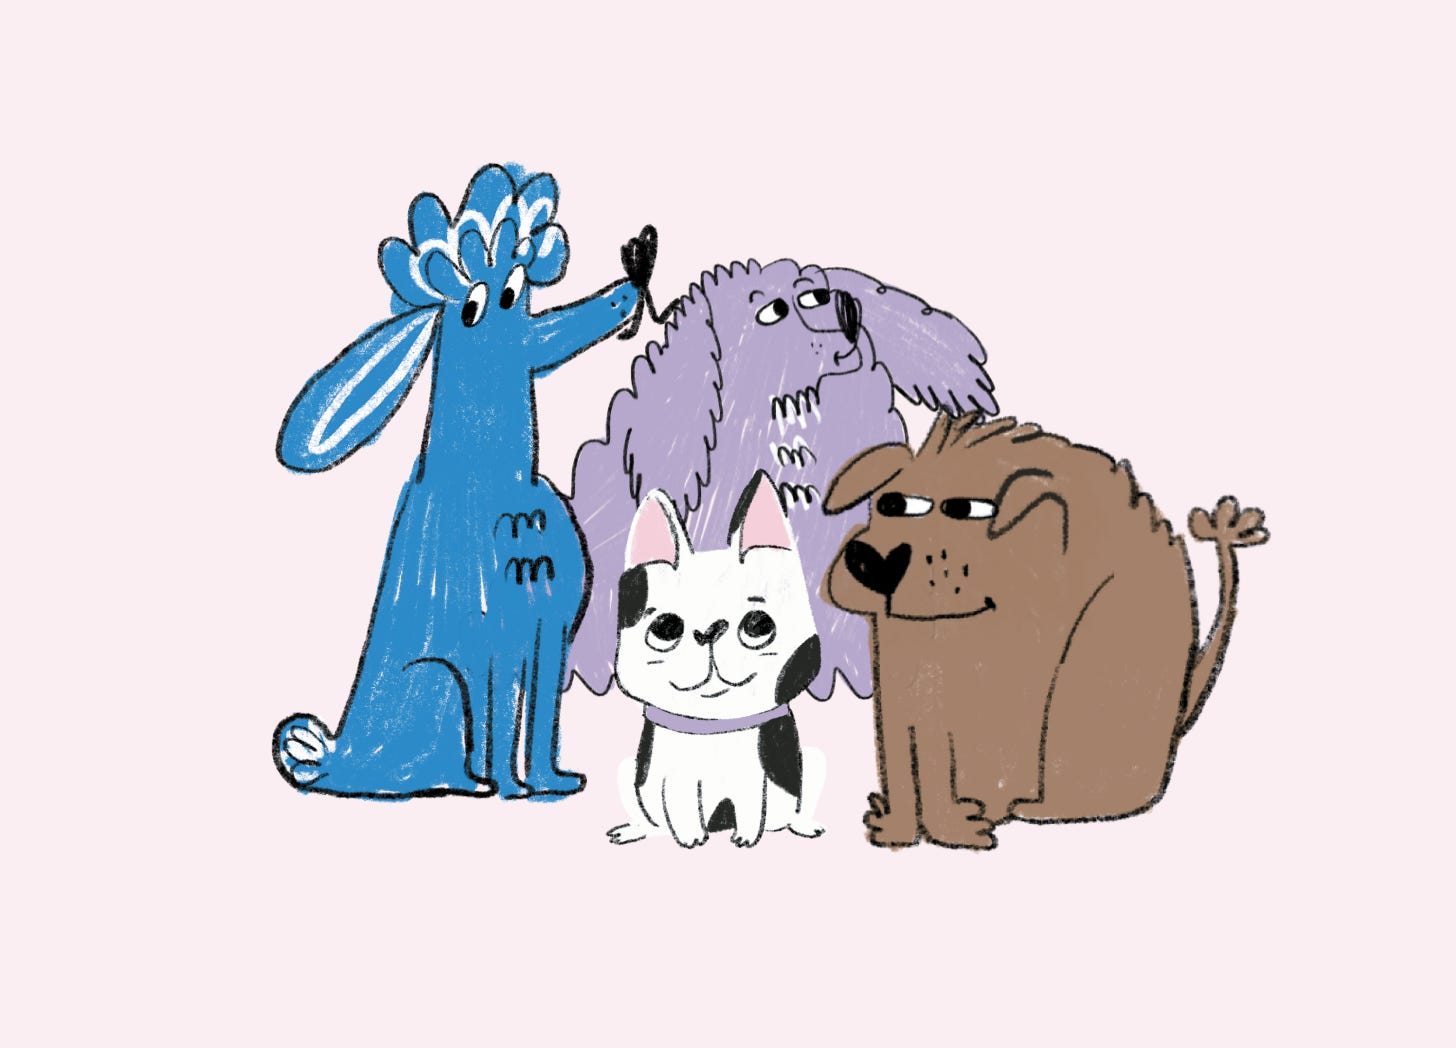 Illustration of a group of dogs of different sizes, textures, and colors.